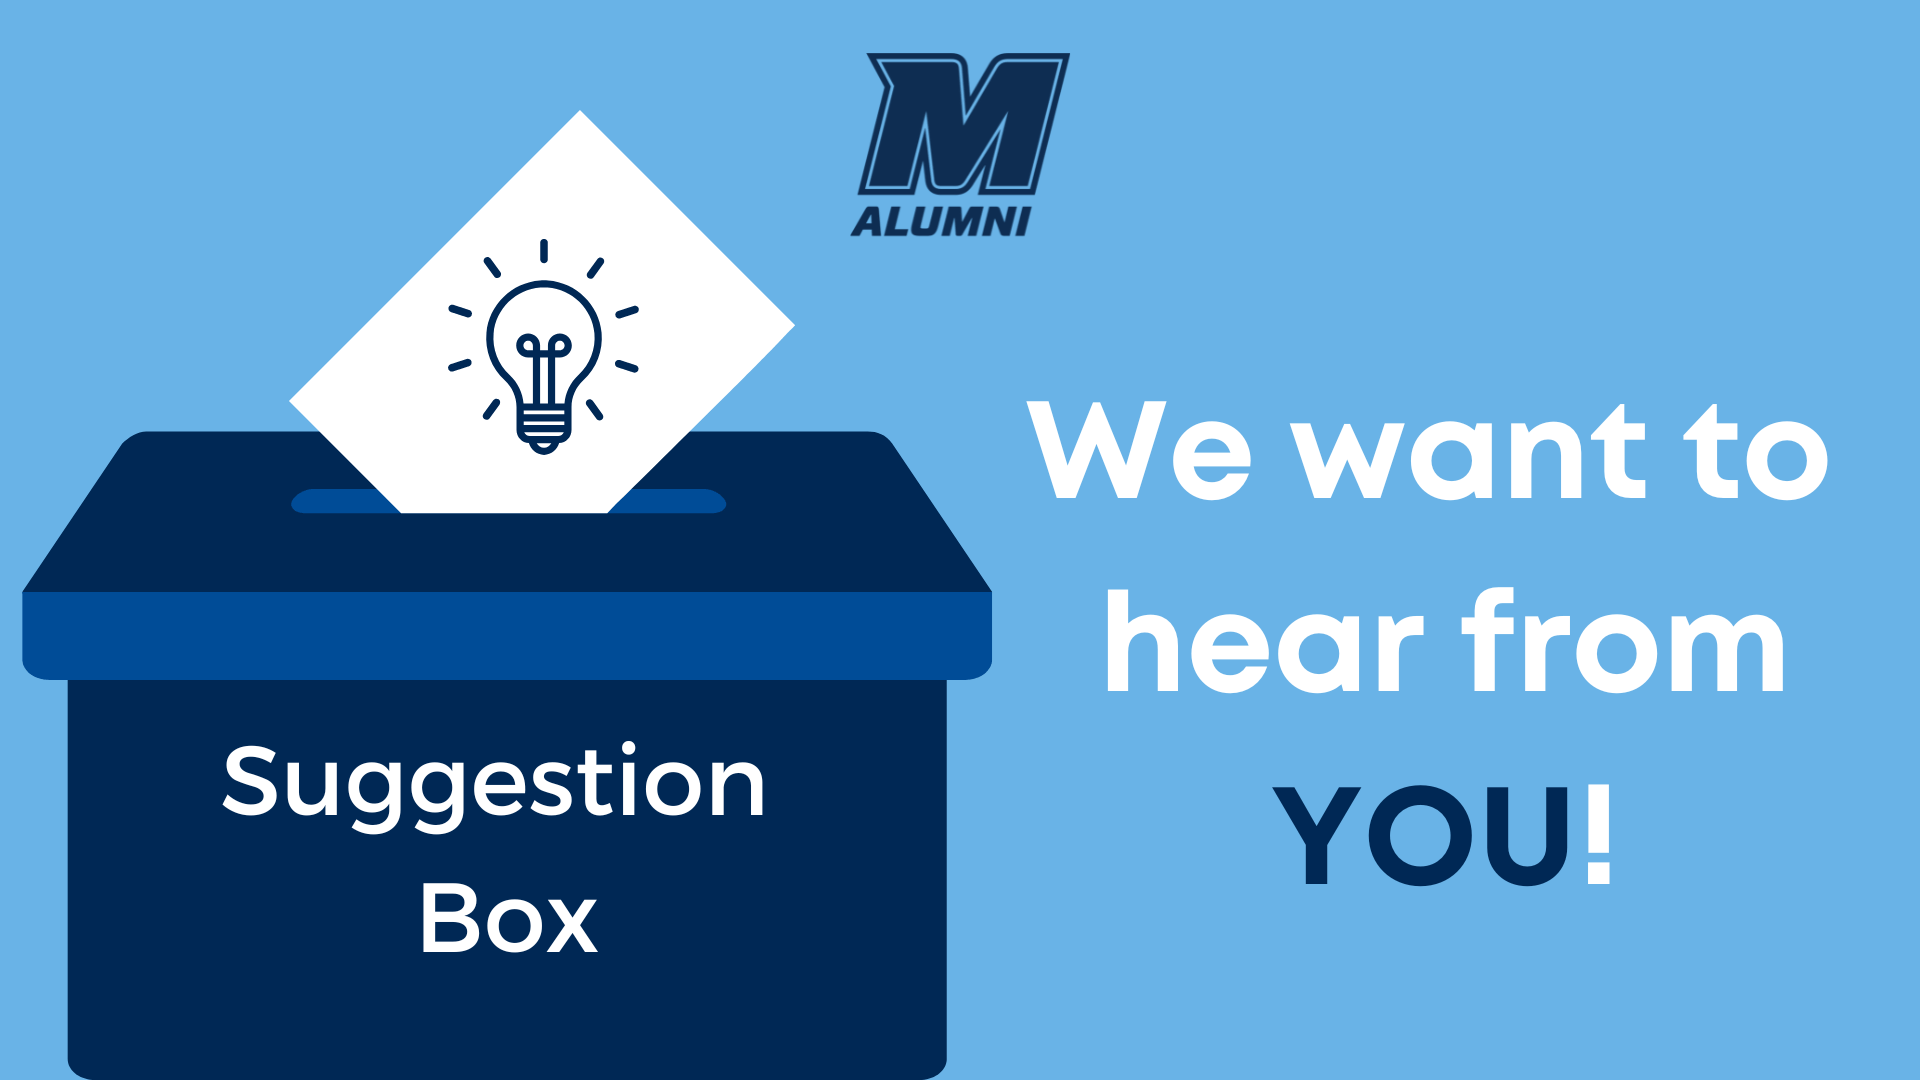 Suggestion Box: We want to hear from you!